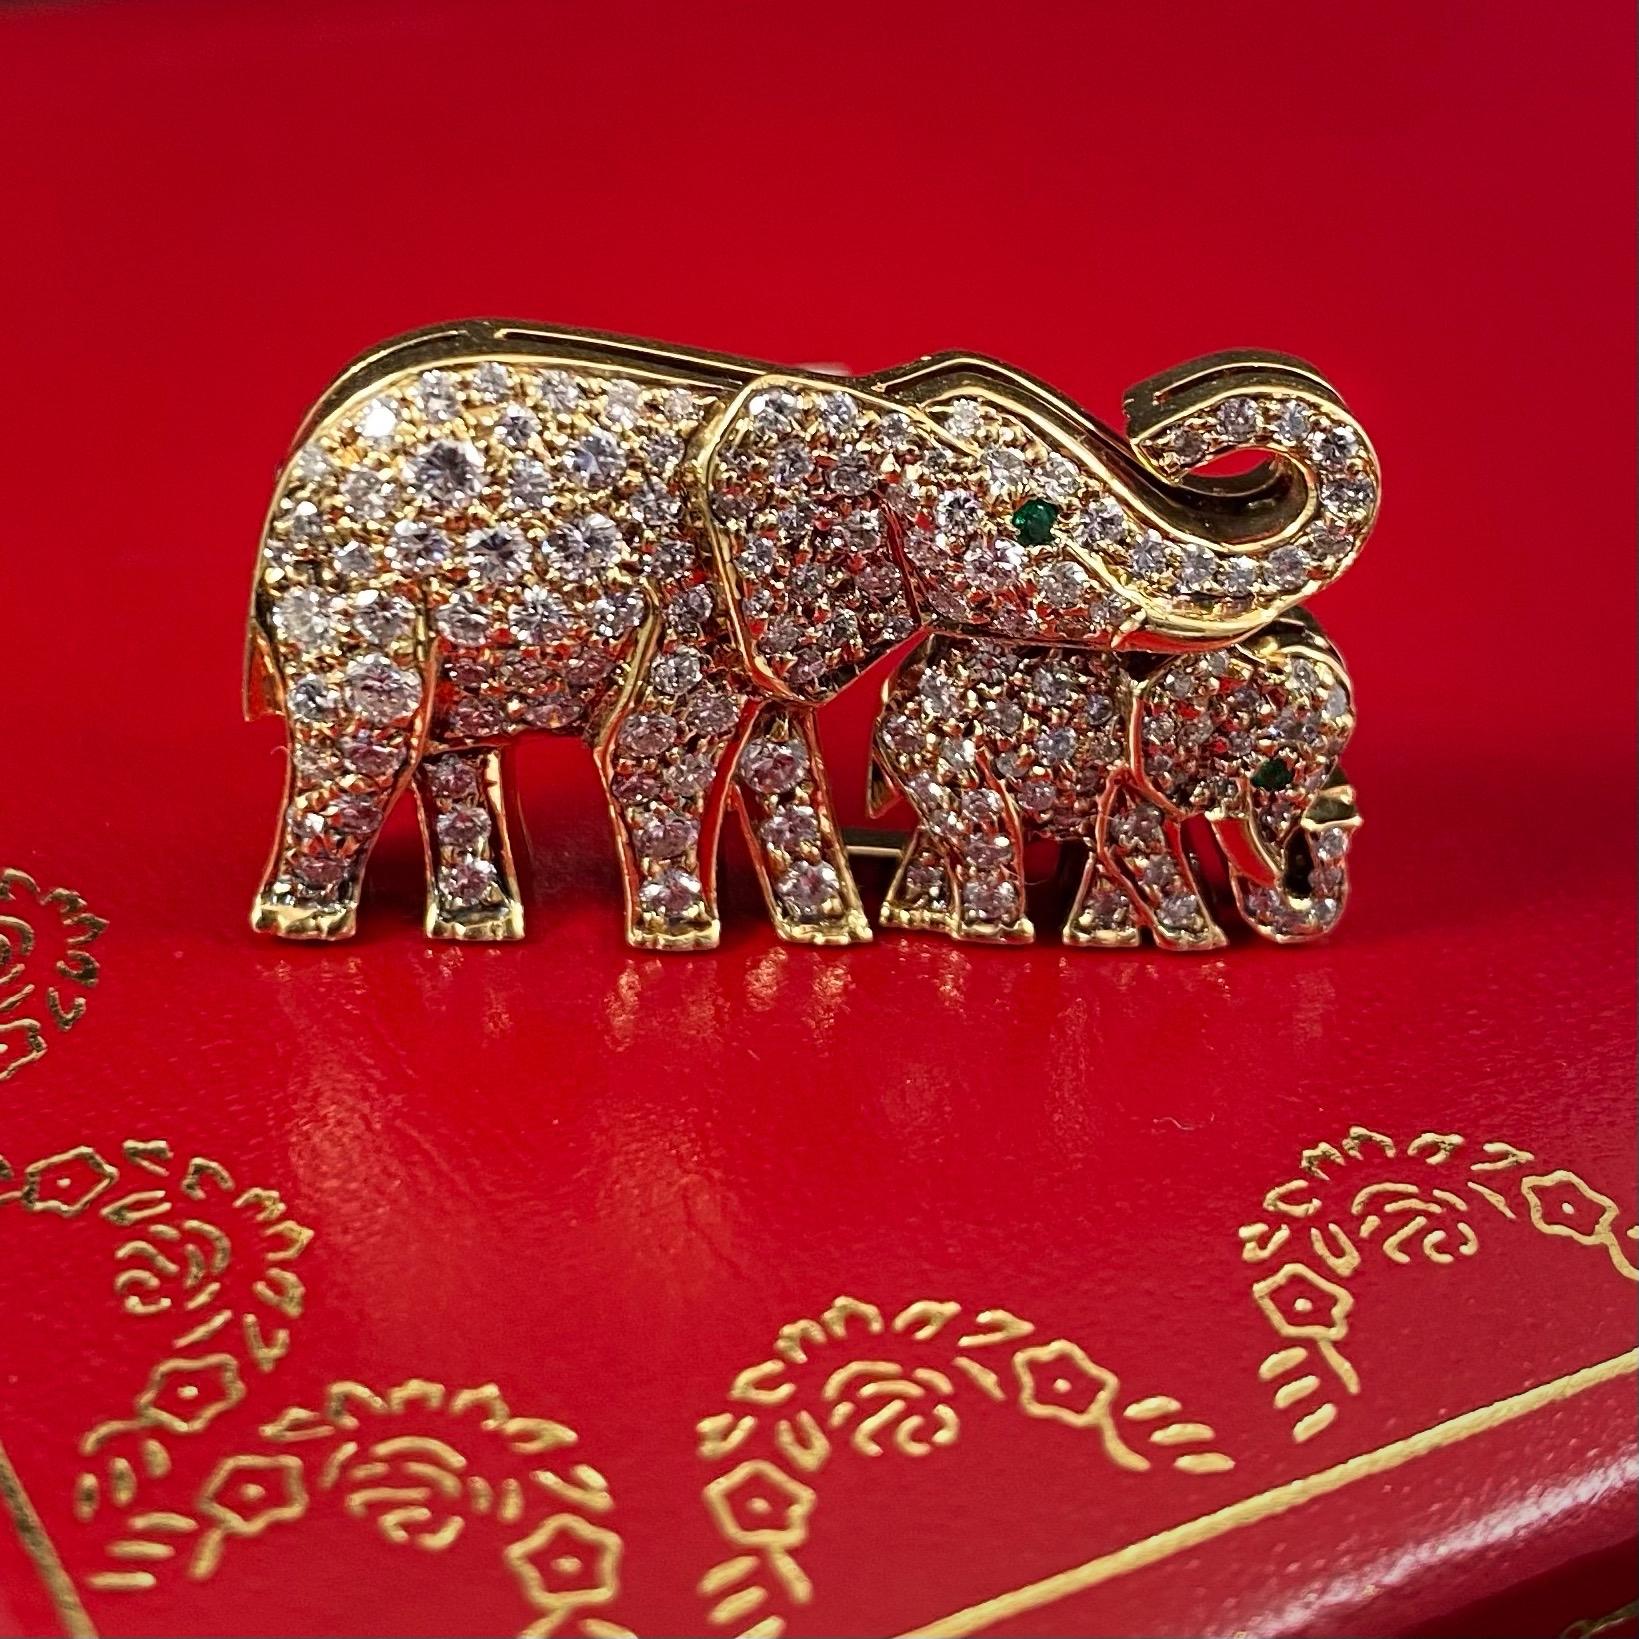 Cartier vintage diamond and emerald elephant with baby calf brooch pin in 18K yellow and white gold, French, 1990s (circa 1992), accompanied by a Cartier red pouch. This jewel is designed as a mother elephant walking with its calf, both animals